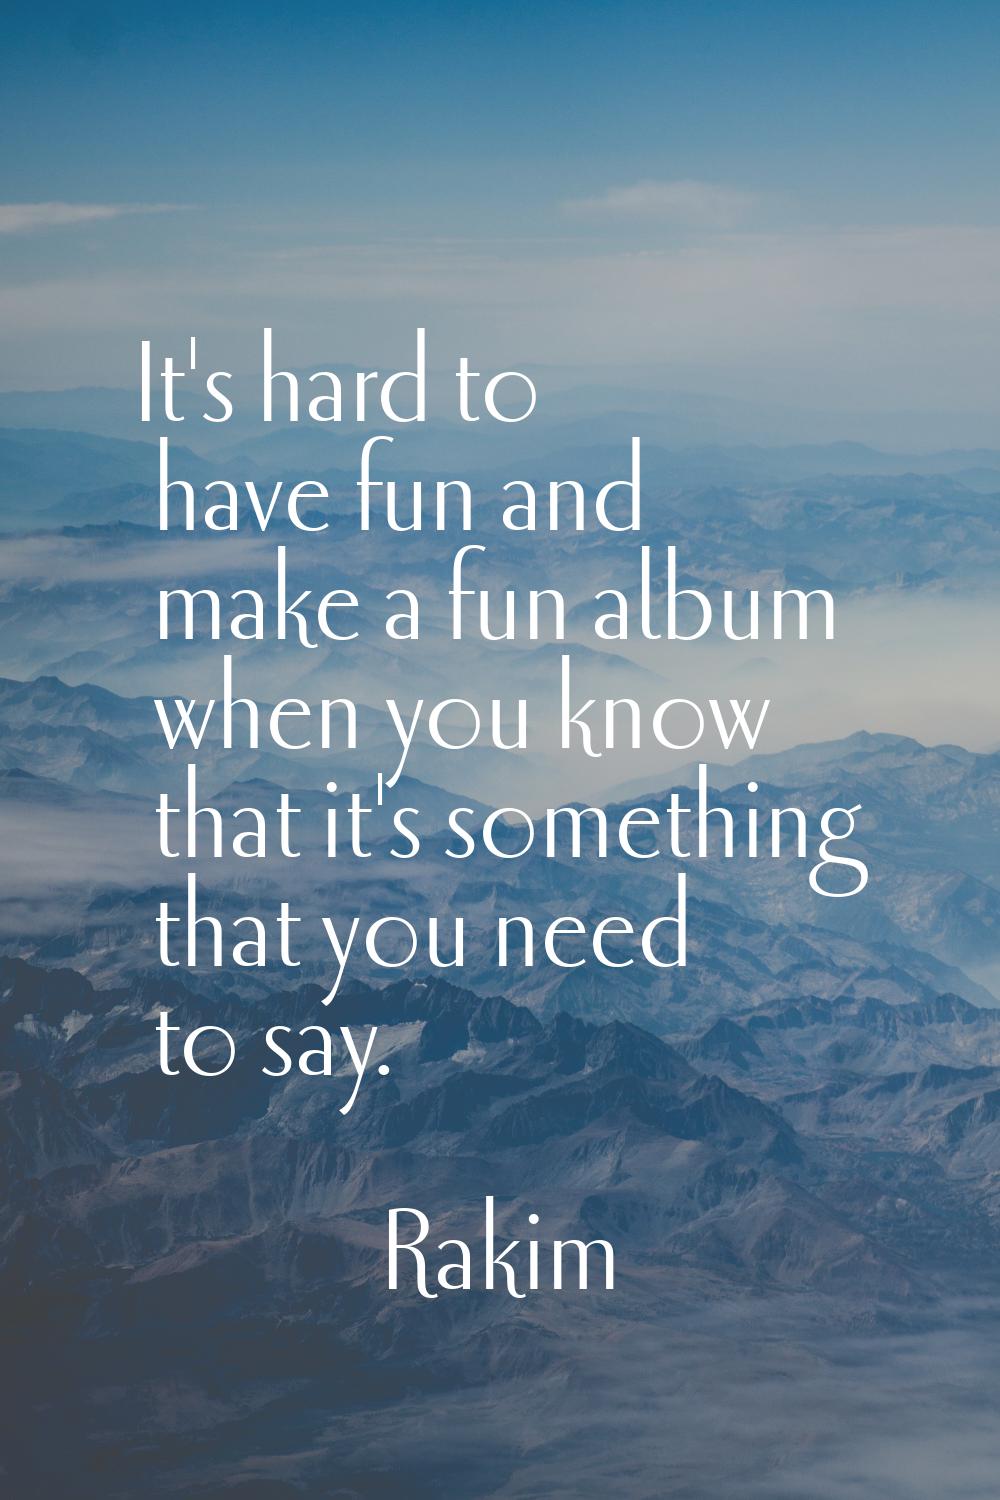 It's hard to have fun and make a fun album when you know that it's something that you need to say.